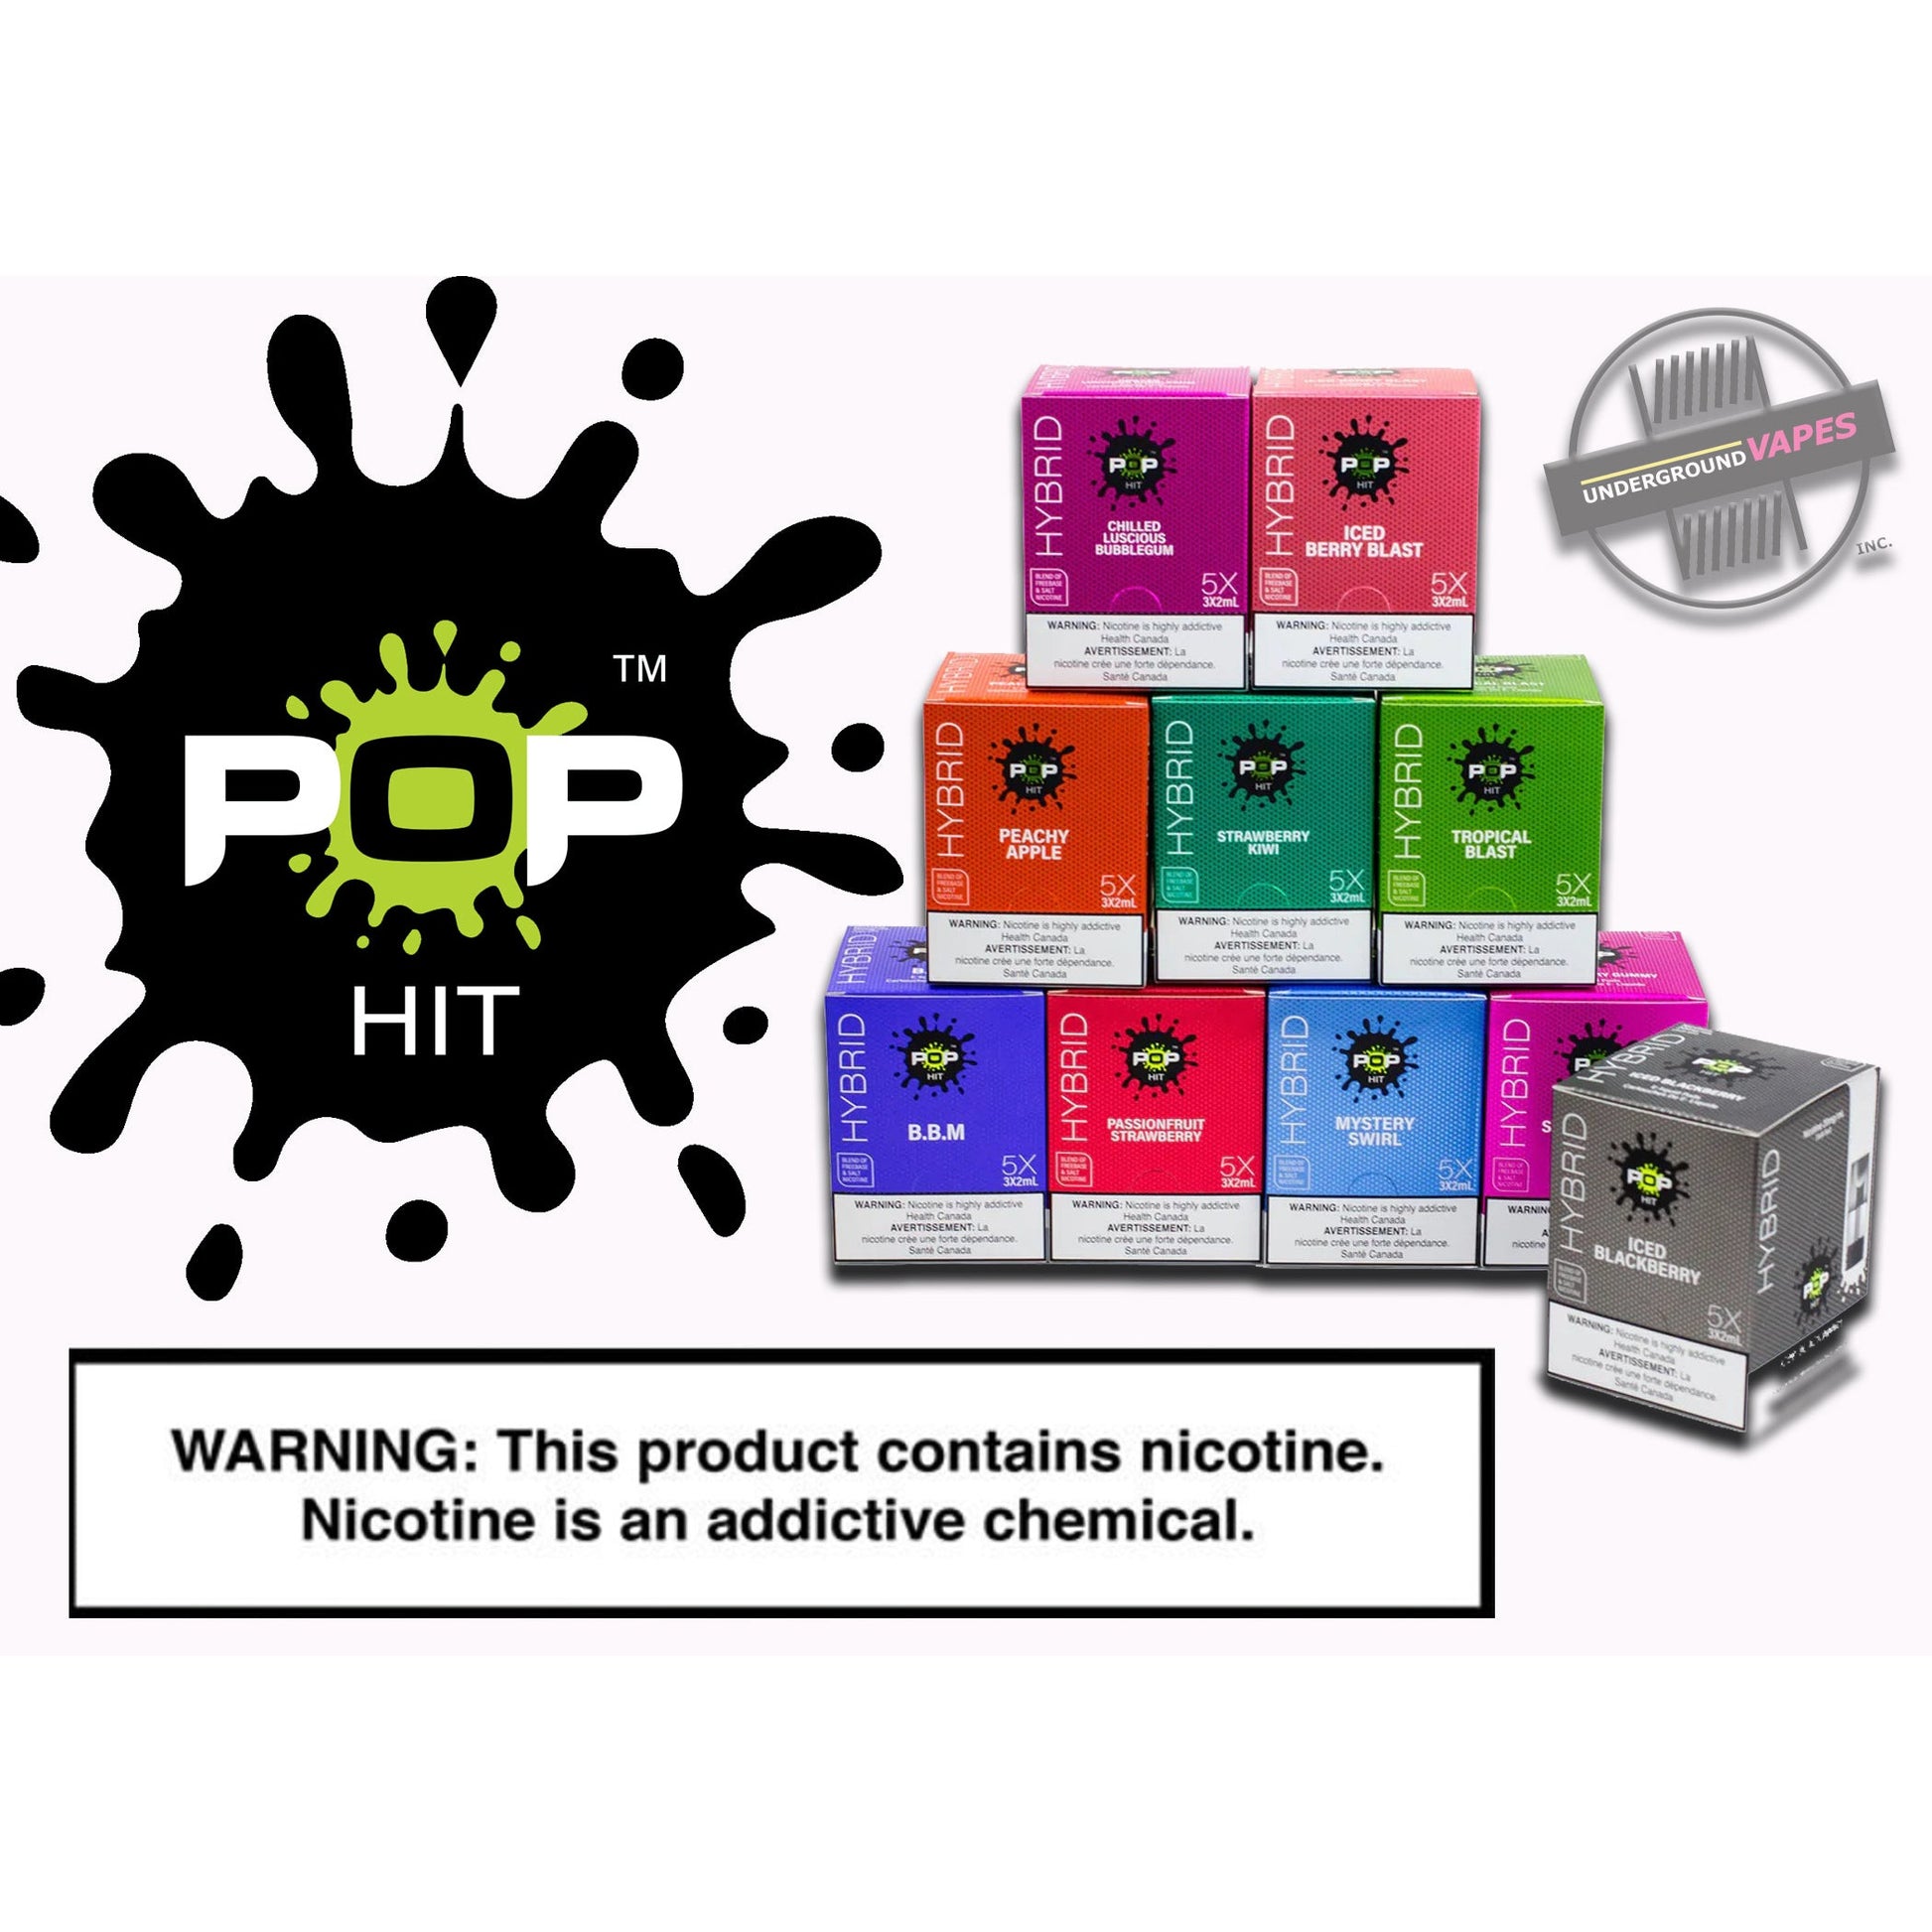 STLTH COMPATIBLE HYBRID POP HIT PODS (SEE FLAVOR MENU) EXCISE TAXED - Underground Vapes Inc - Cambridge